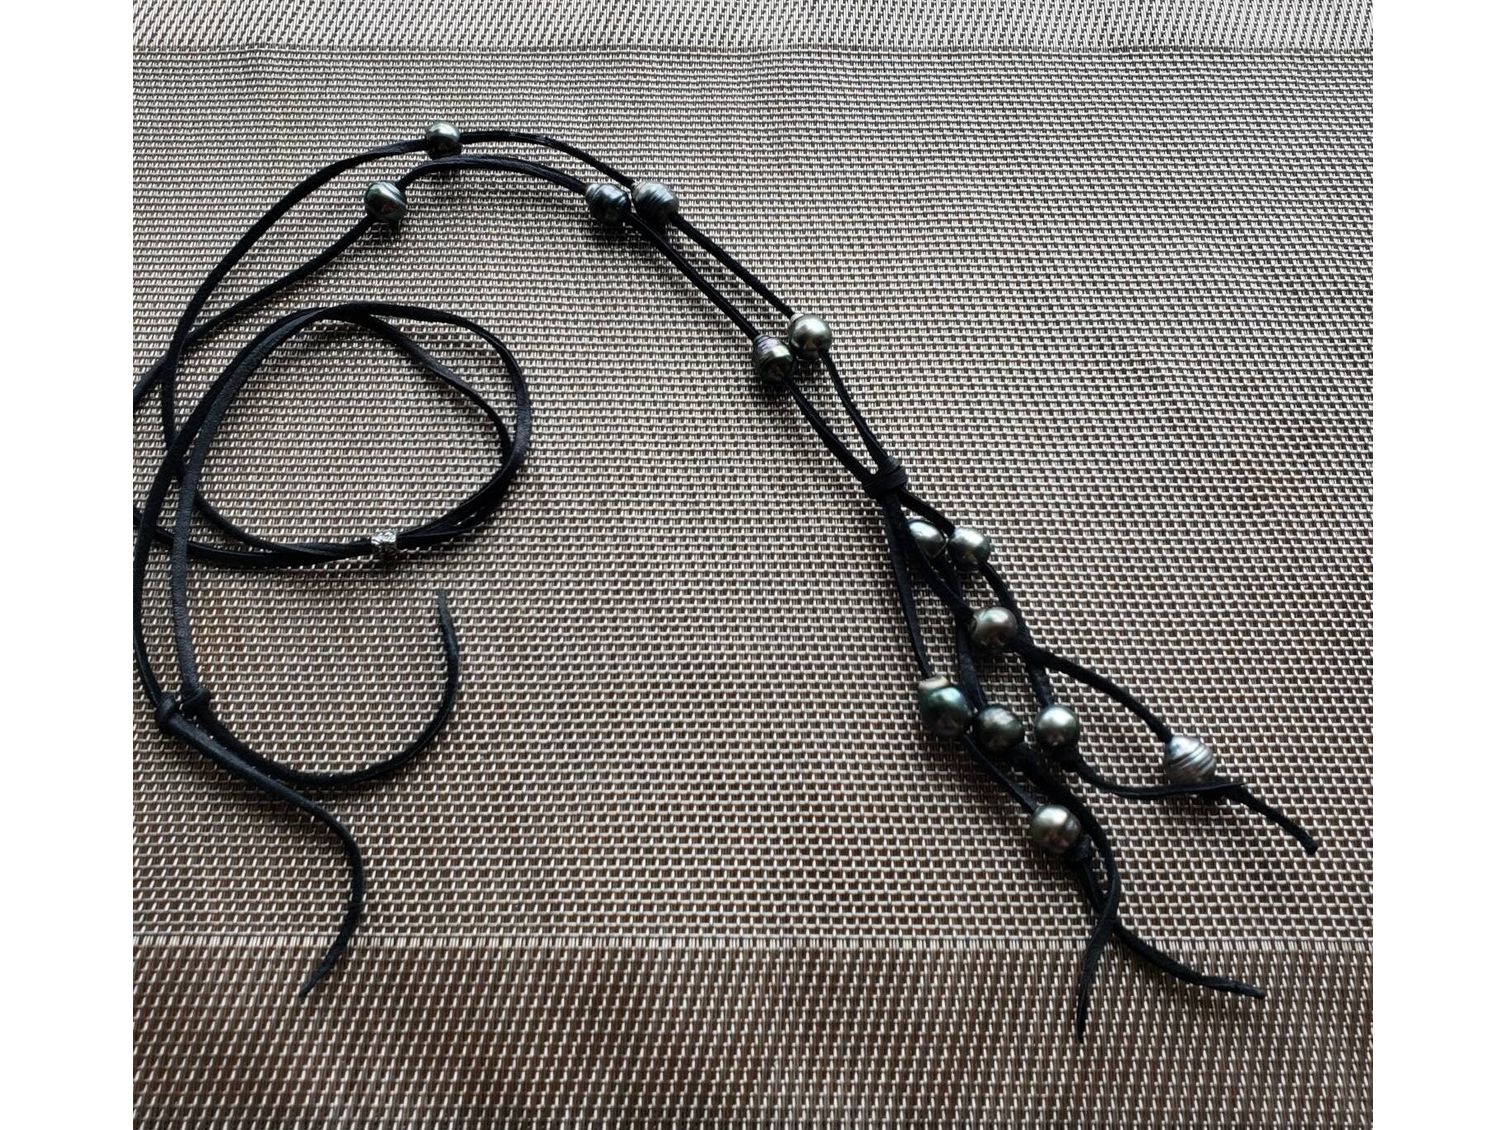 Black Tahitian pearls suede leather necklace, lariat style Y necklace, 3rd anniversary gift for wife,